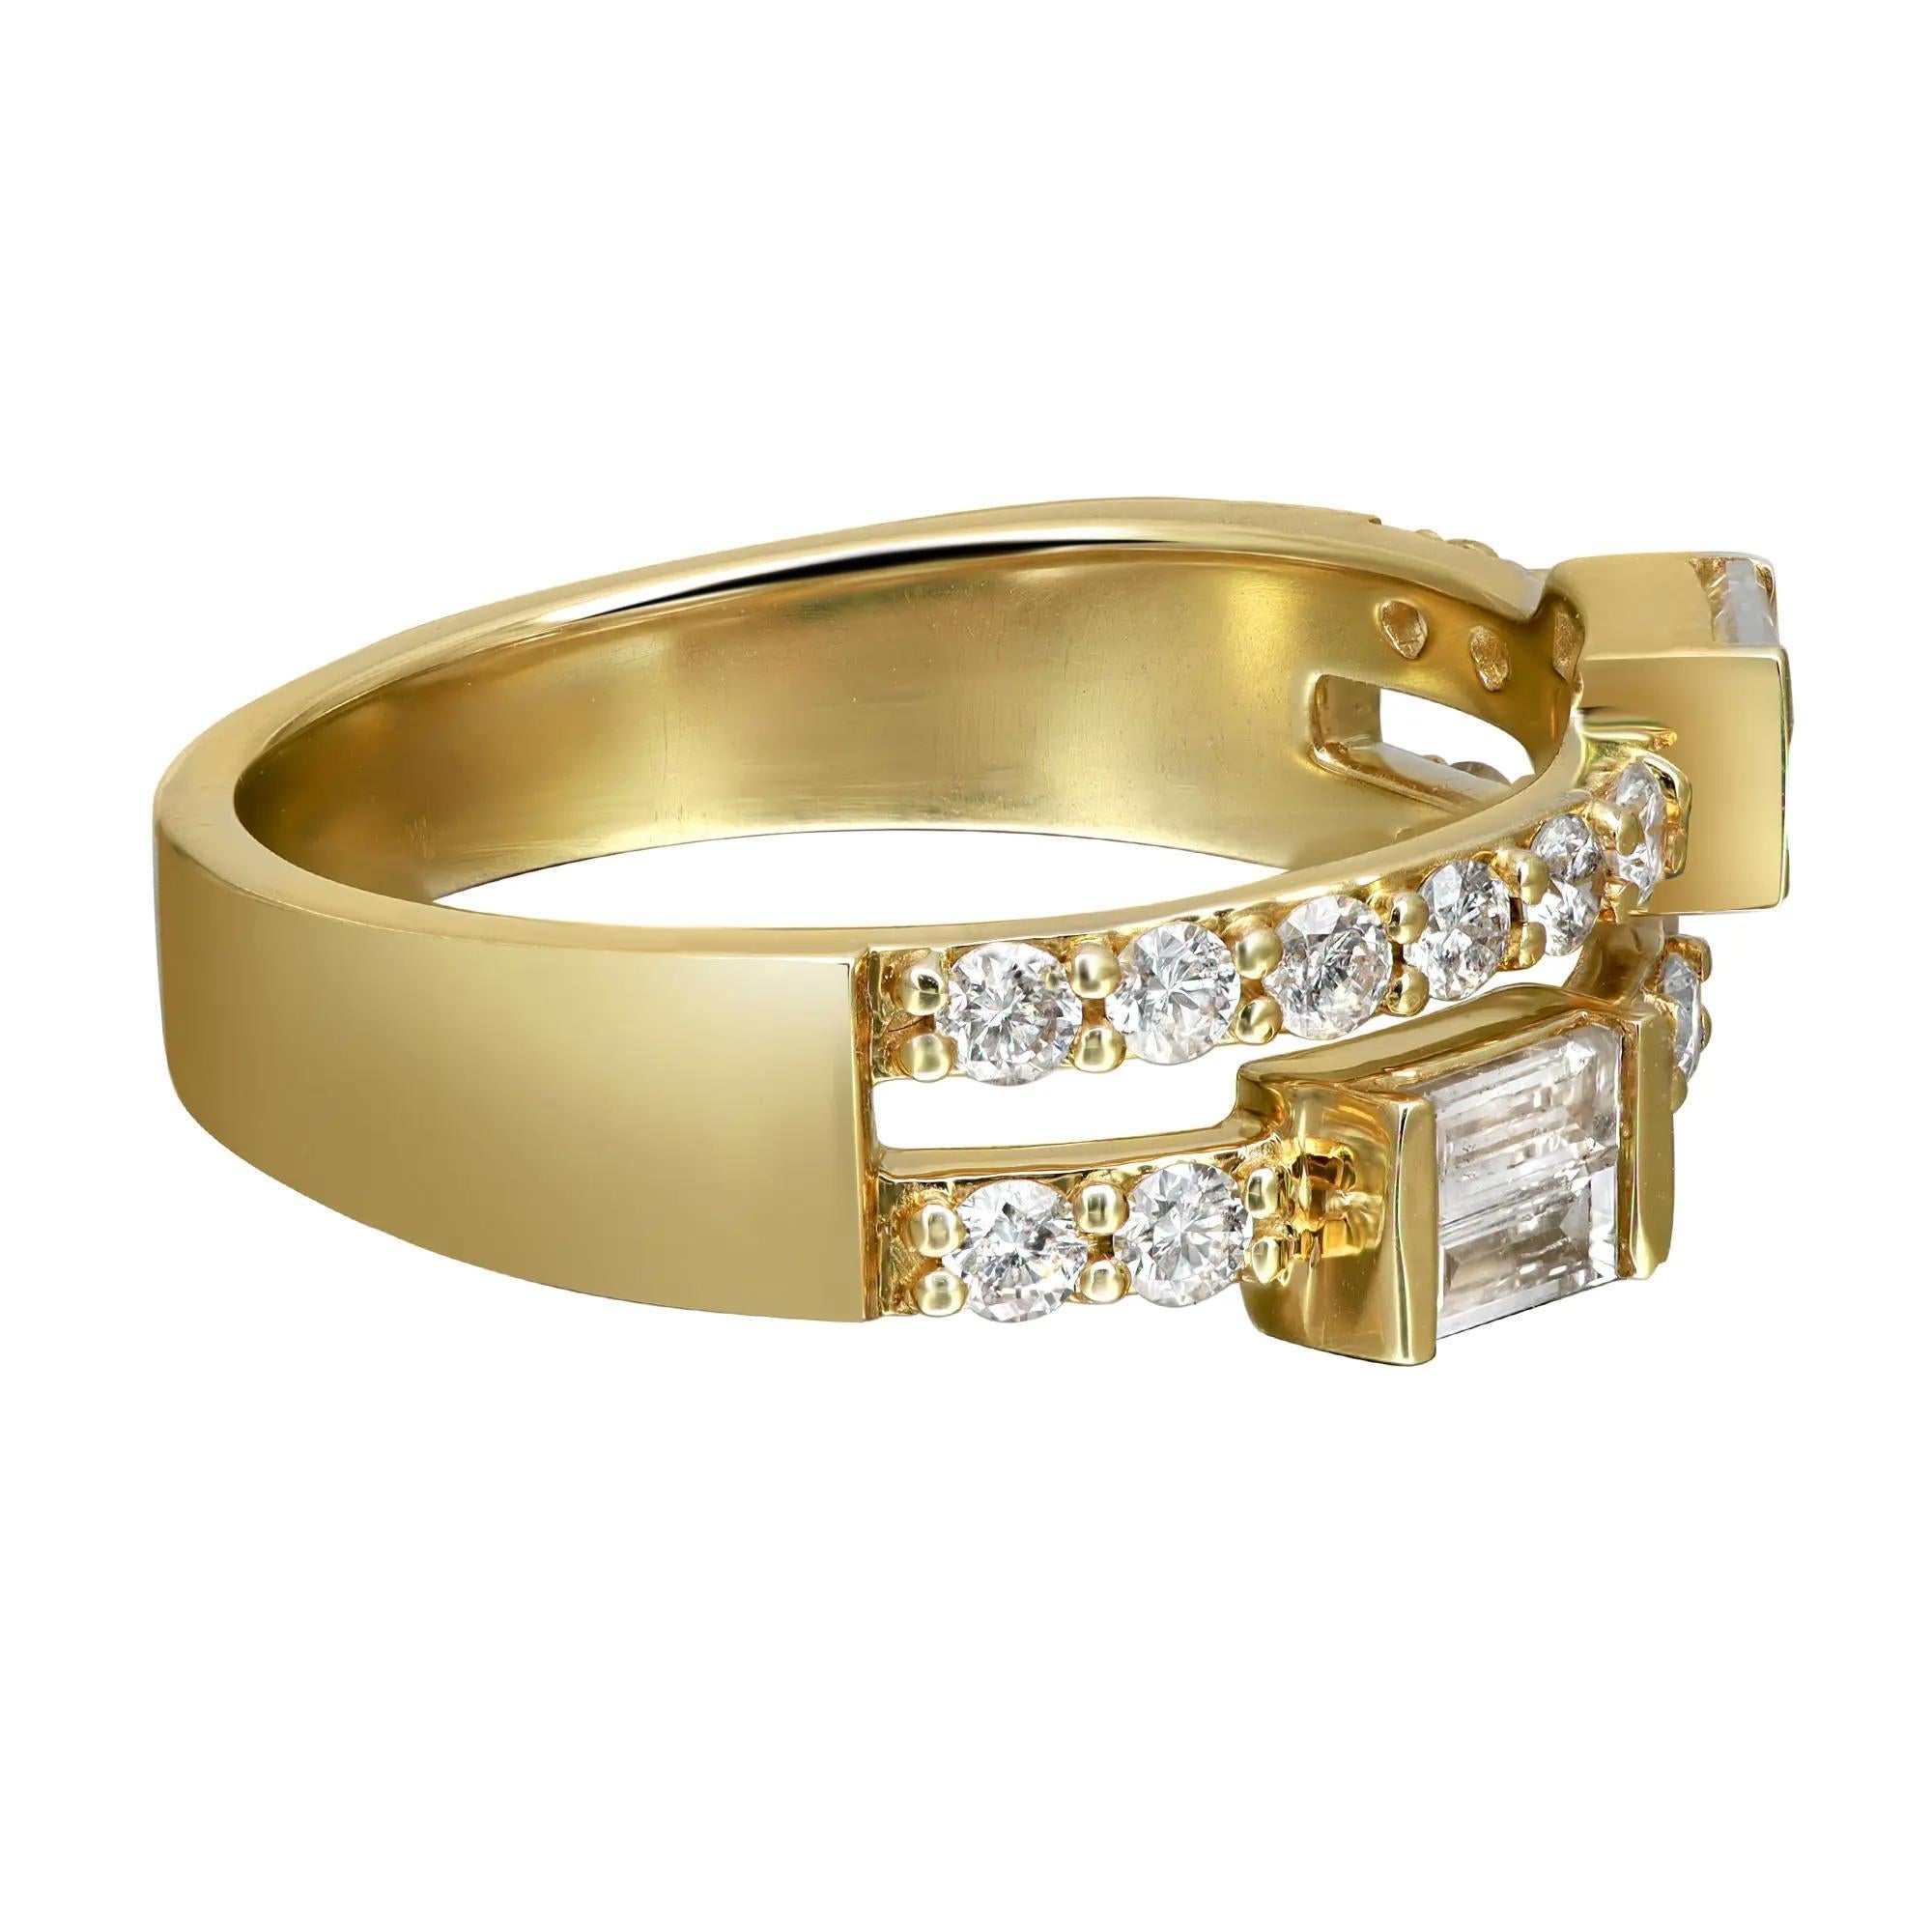 Shimmering and elegant, this diamond band ring is perfect for any occasion. Crafted in lustrous 14K yellow gold. This beautiful ring is adorned with channel set baguette cut diamonds with two rows of pave set round brilliant cut diamonds studded